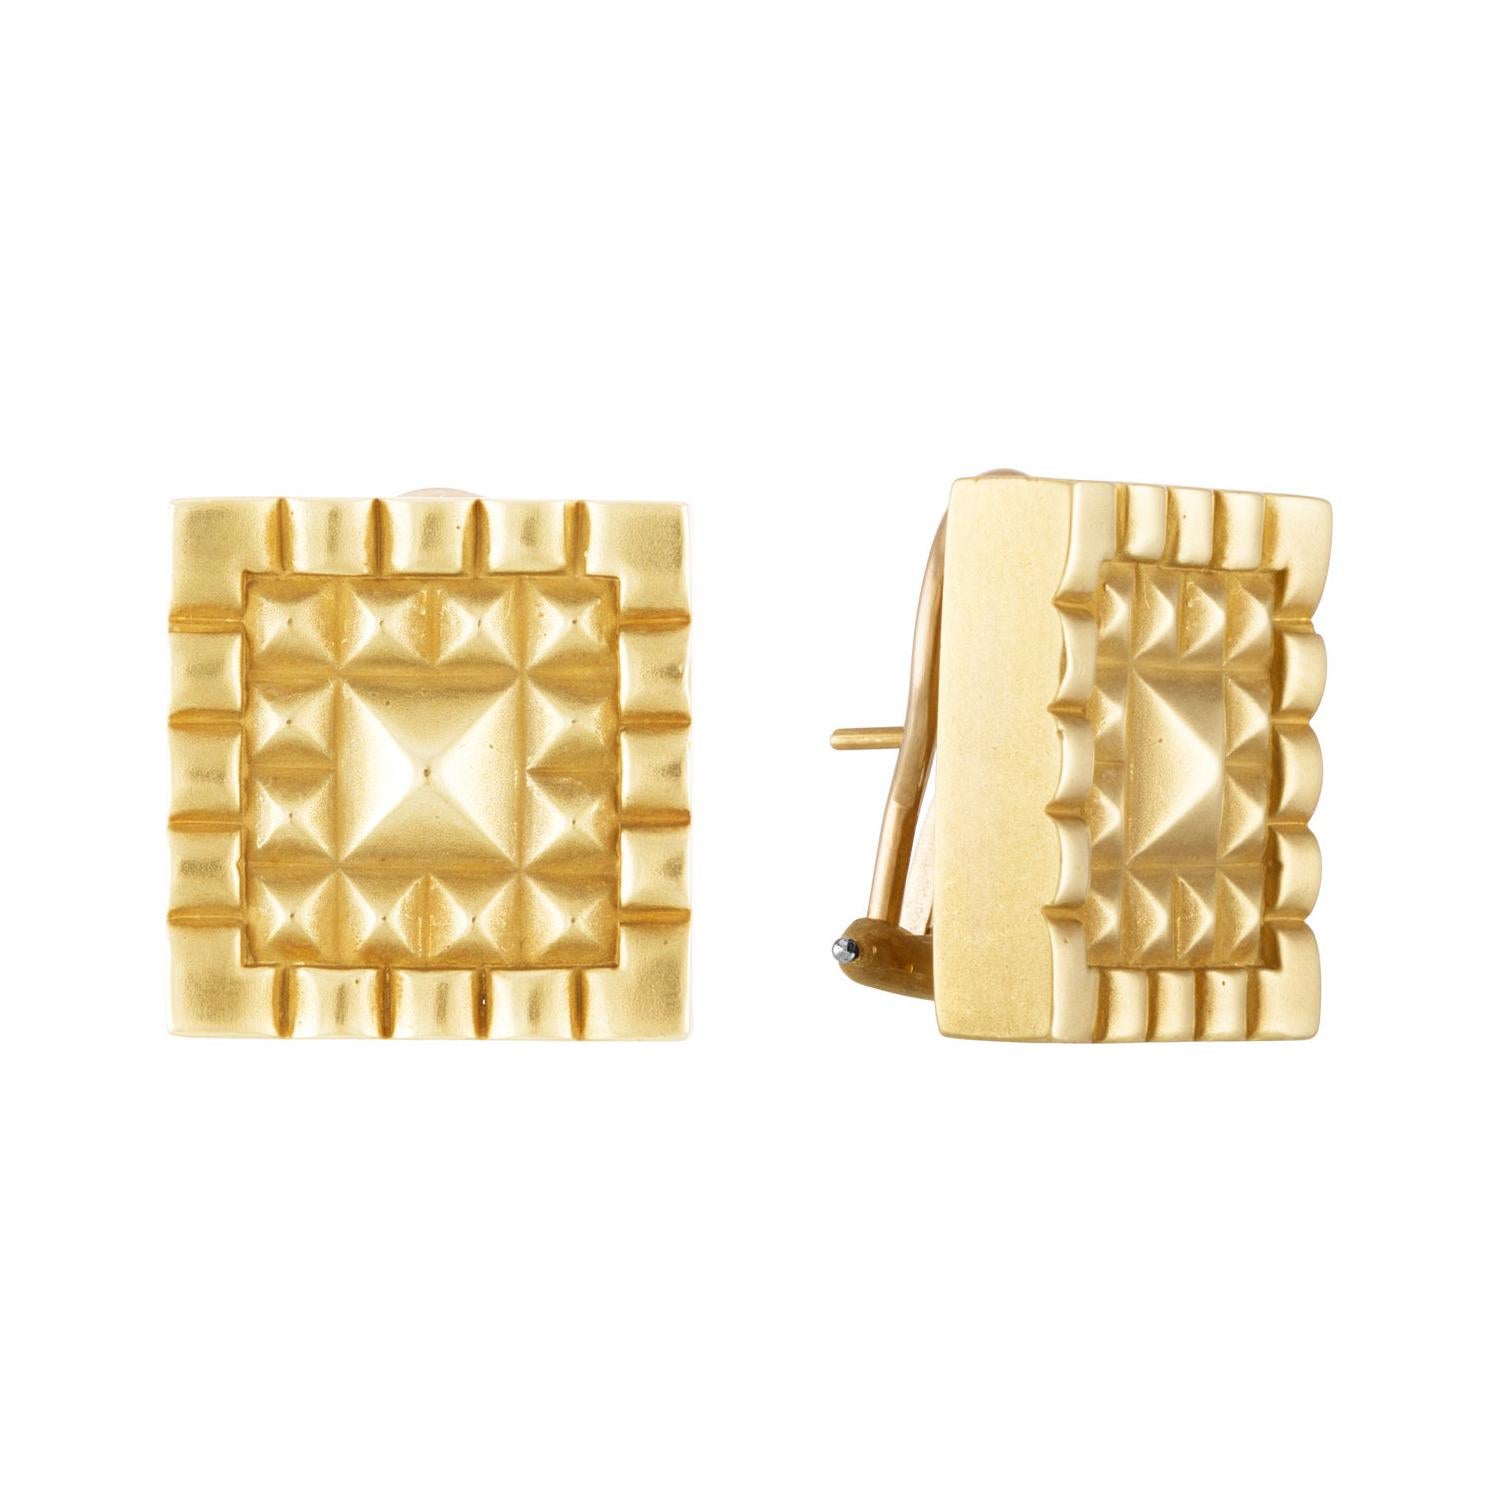 Barry Kieselstein-Cord Square Pyramid Textured Gold Earrings, 1984 For Sale